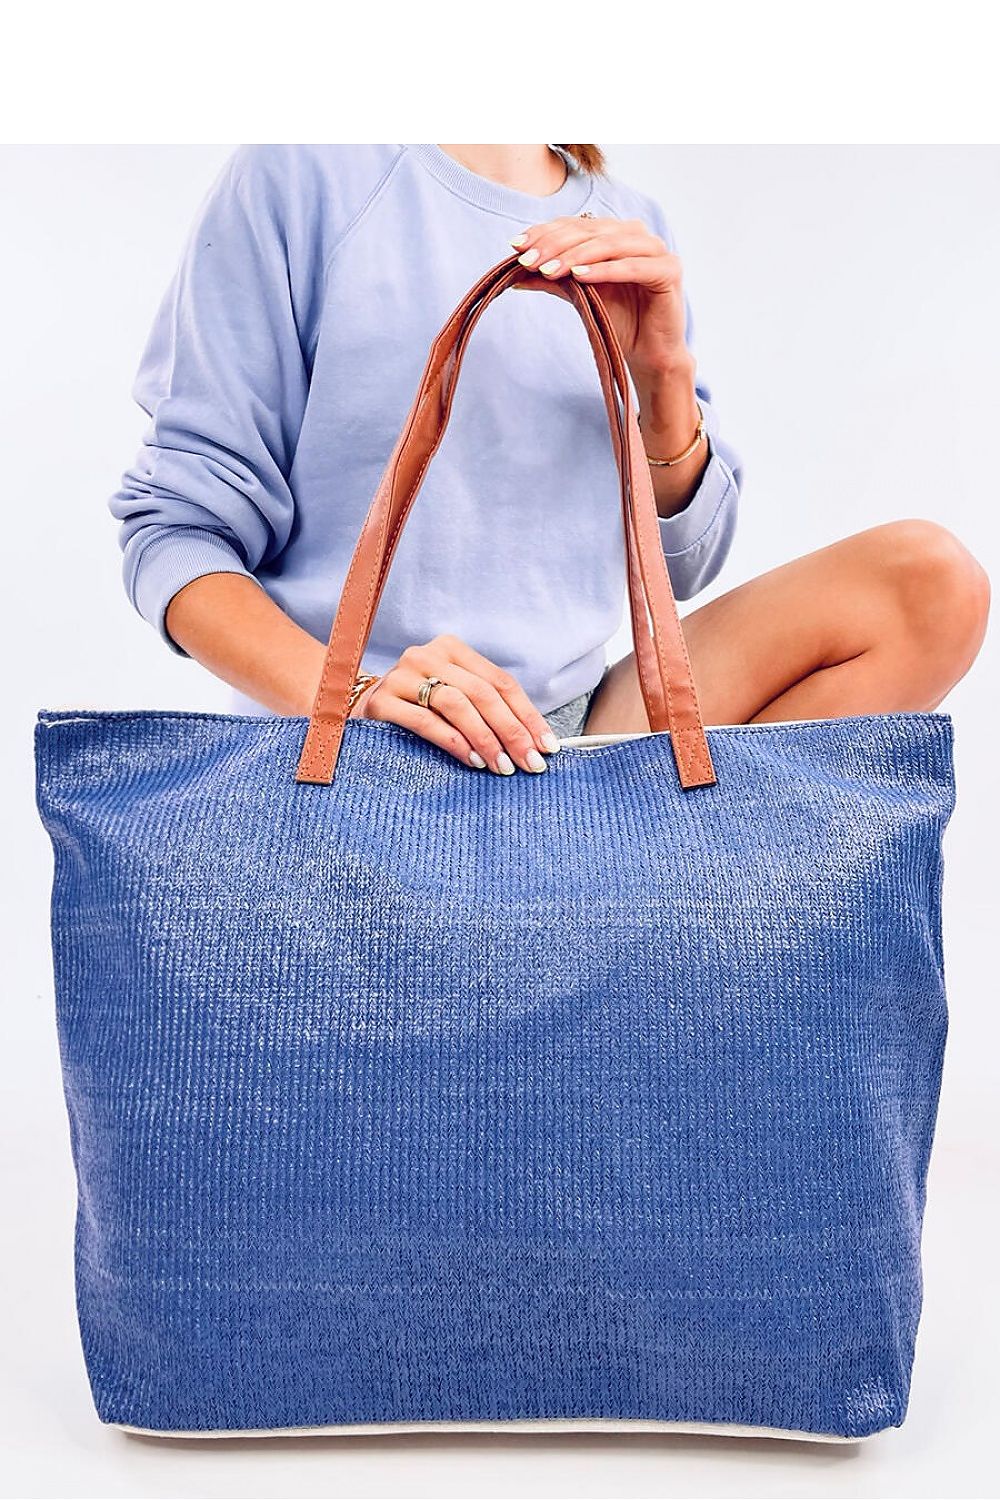 Blue and White Beach Bag by Inello